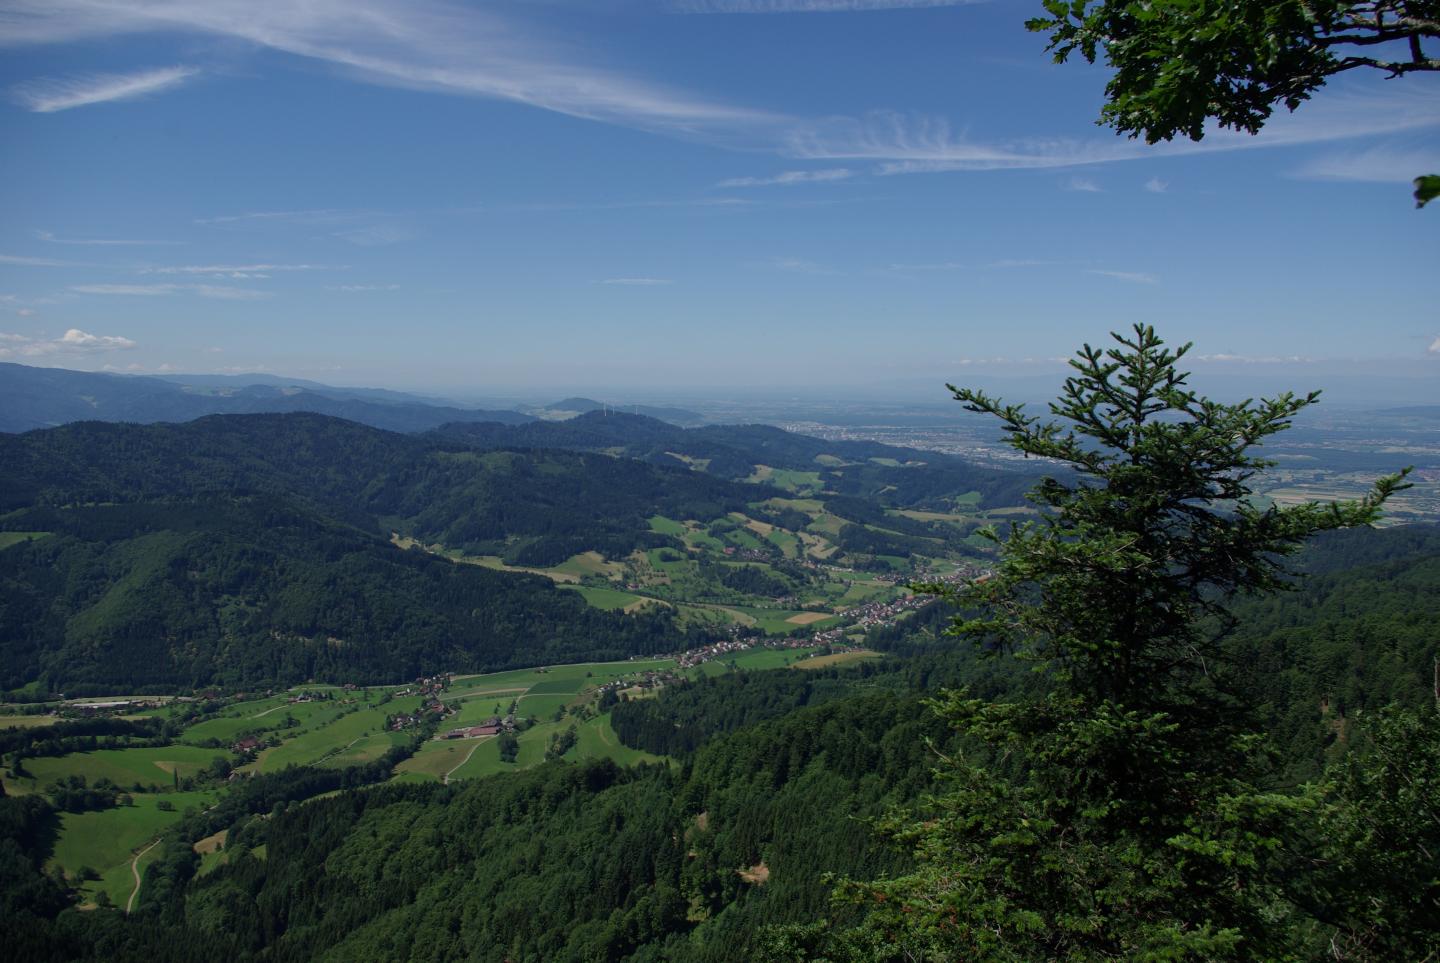 The Black Forest and Climate Change